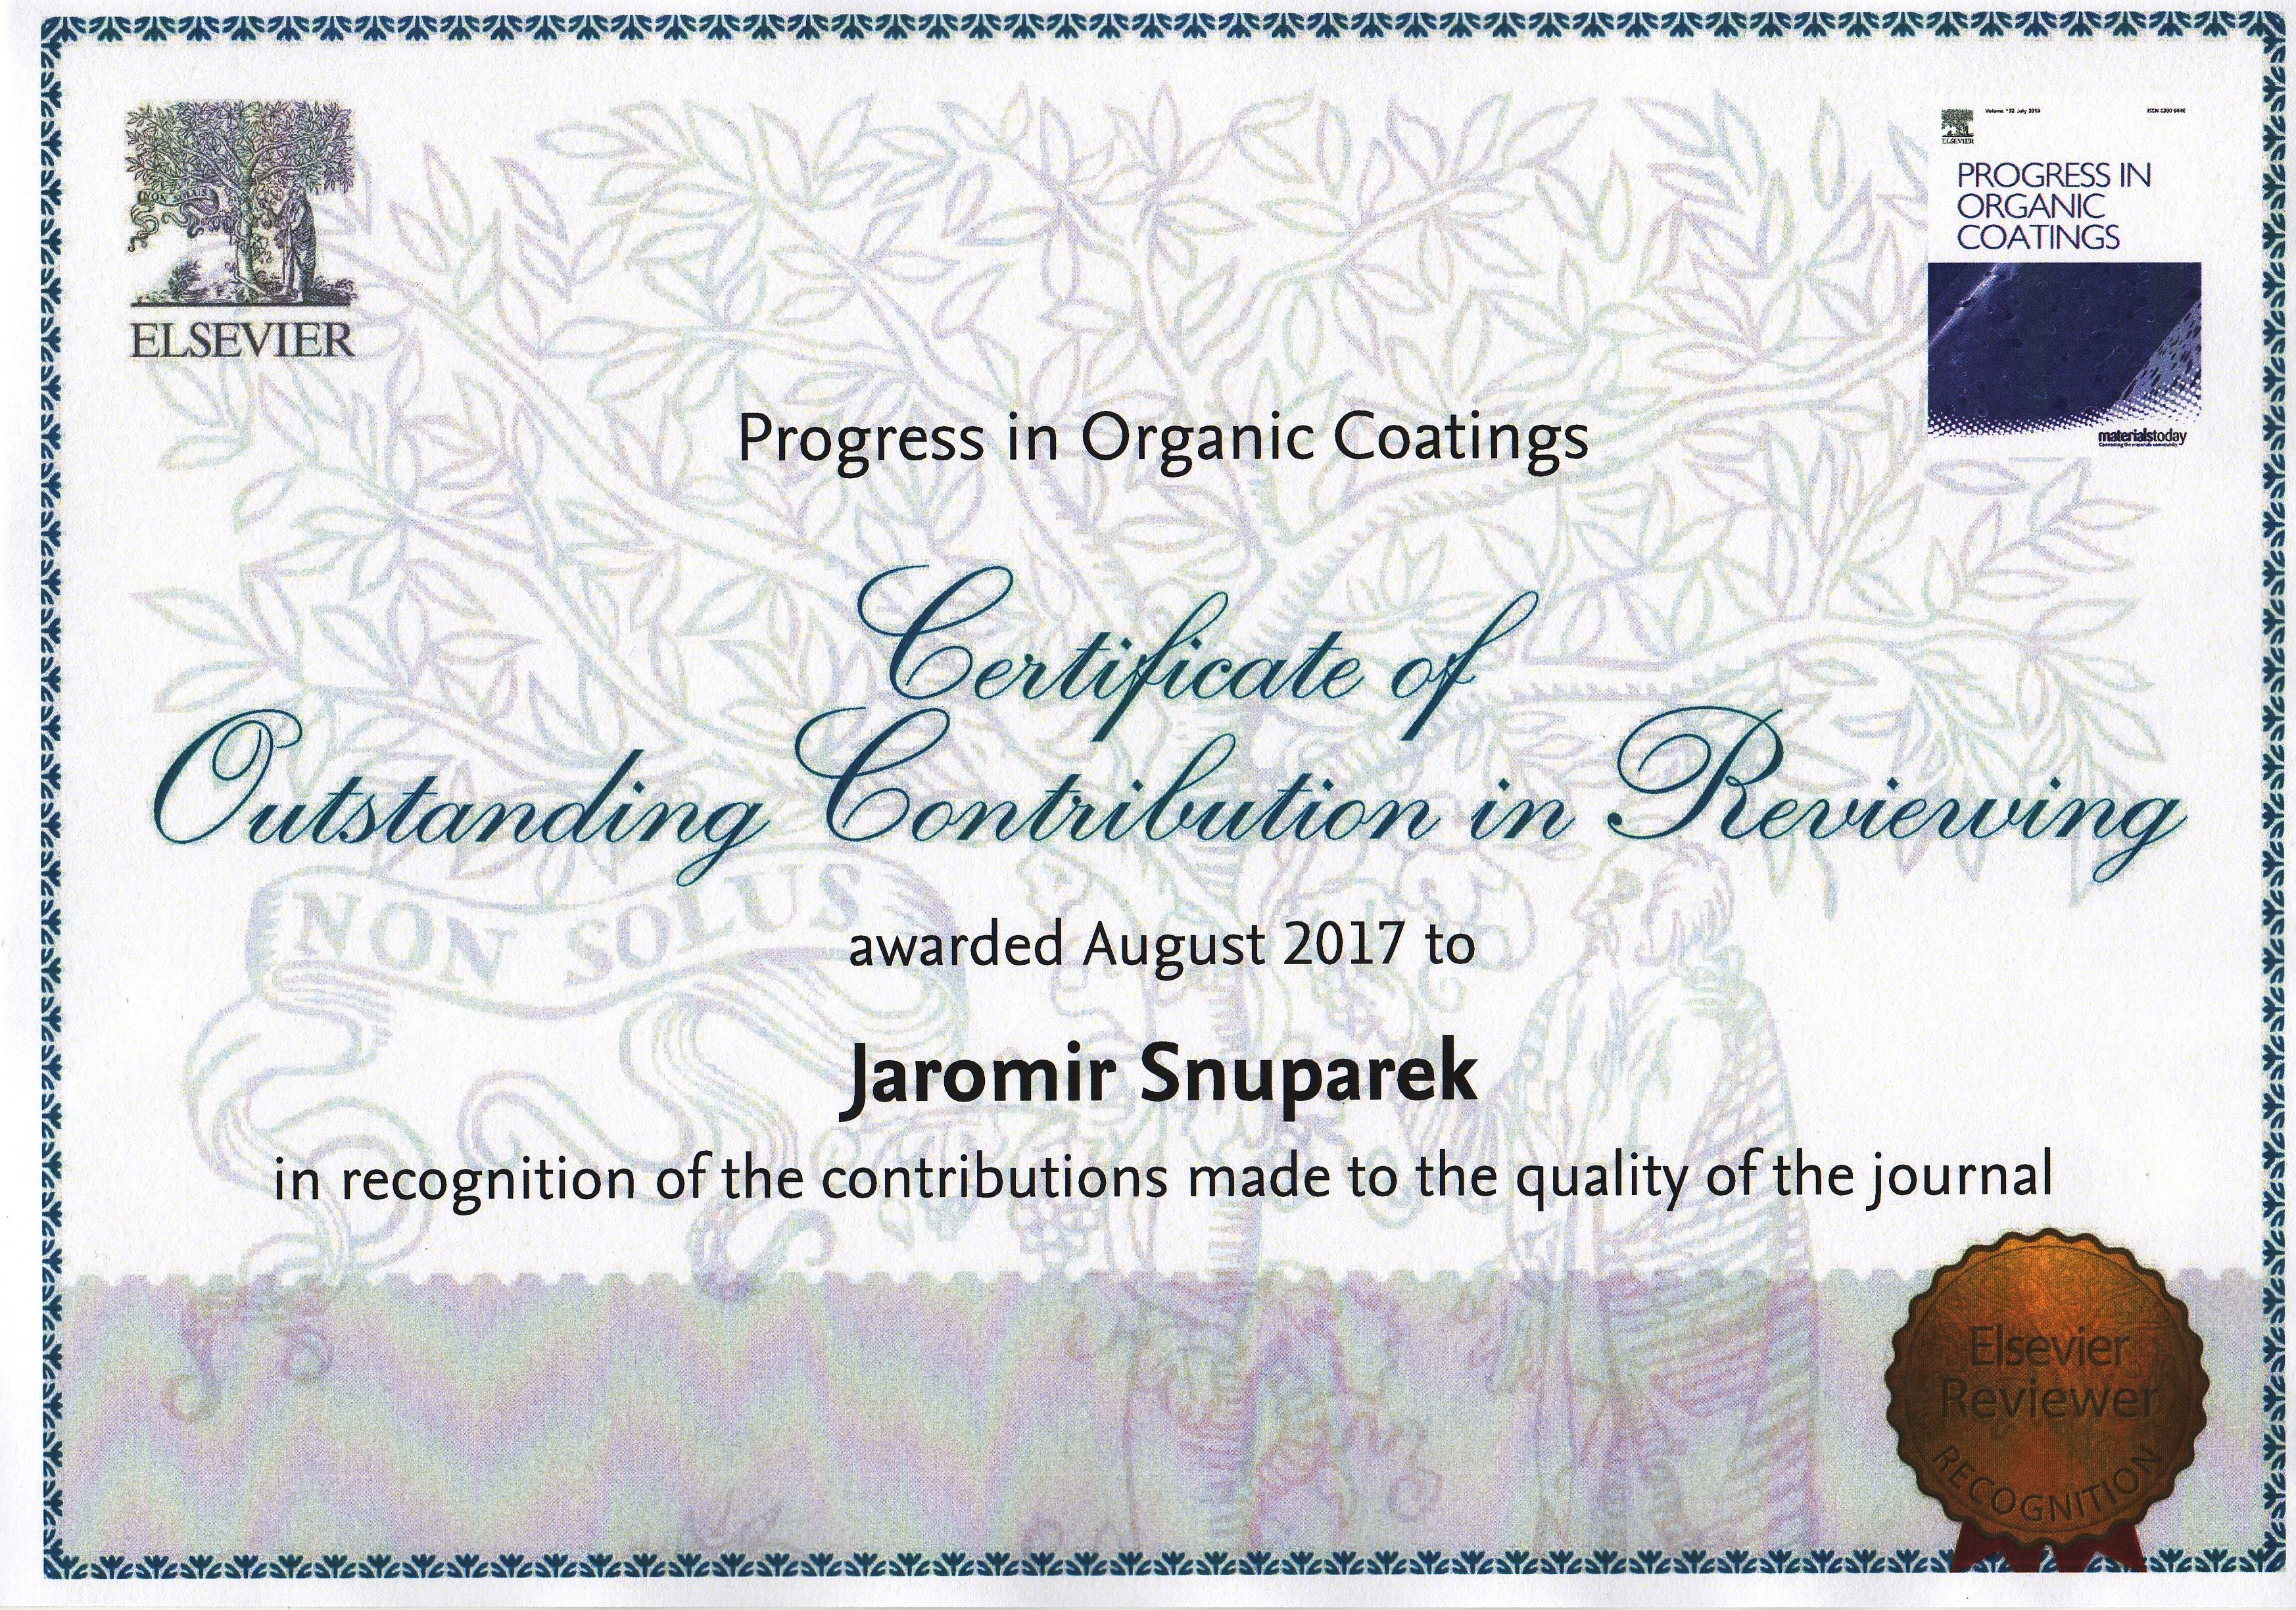 Certificate of Outstanding Contribution in Reviewing